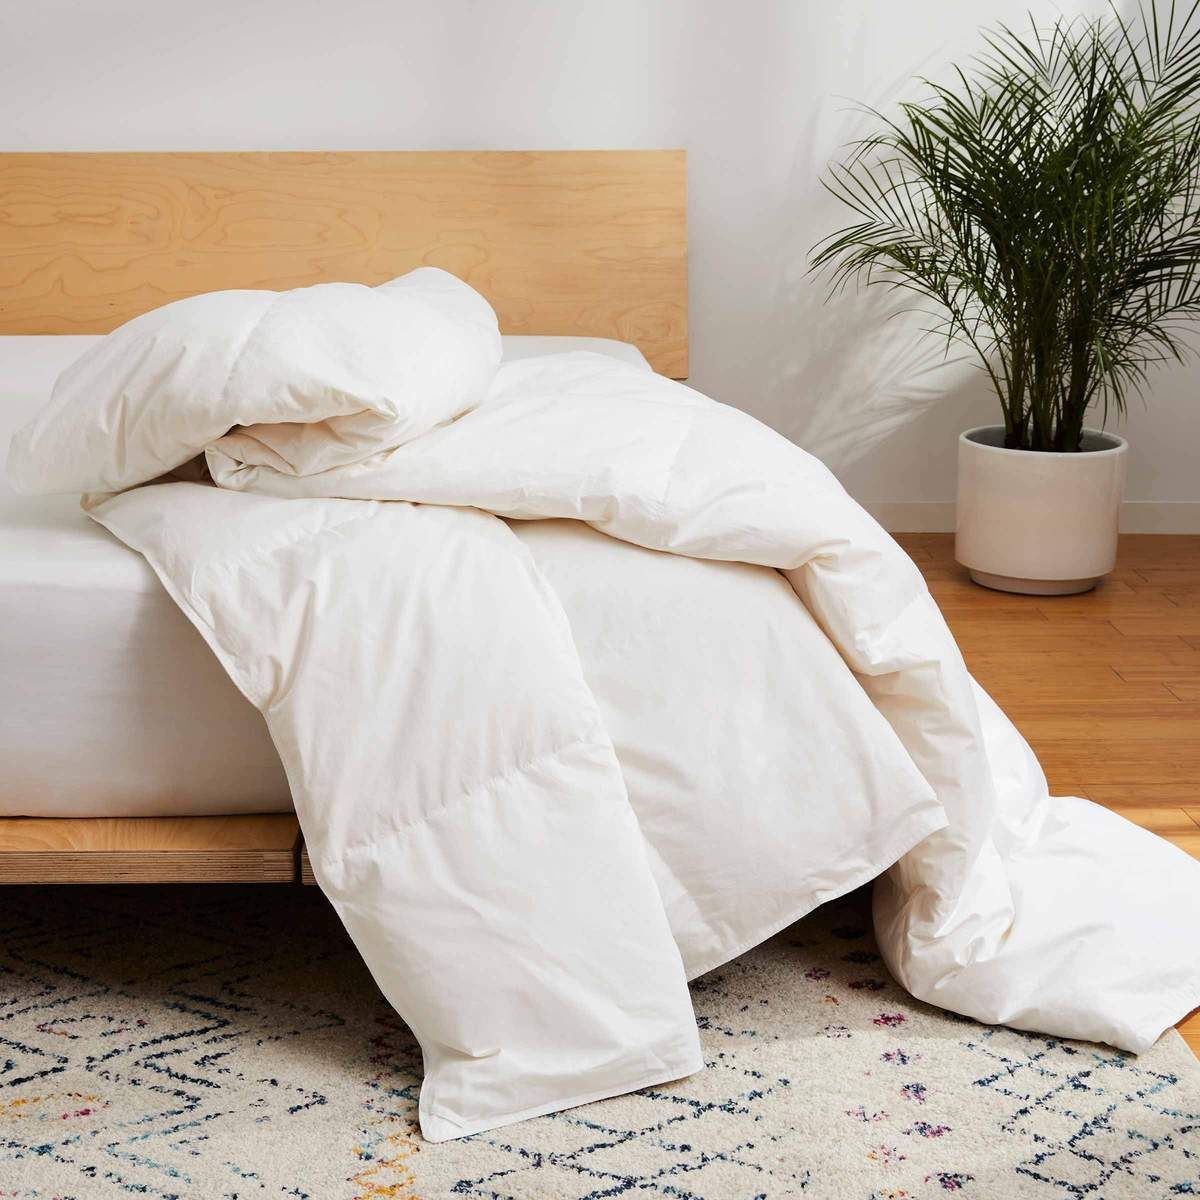 Duvet Vs Comforter The Difference, Do You Need A Duvet Cover For A Down Comforter